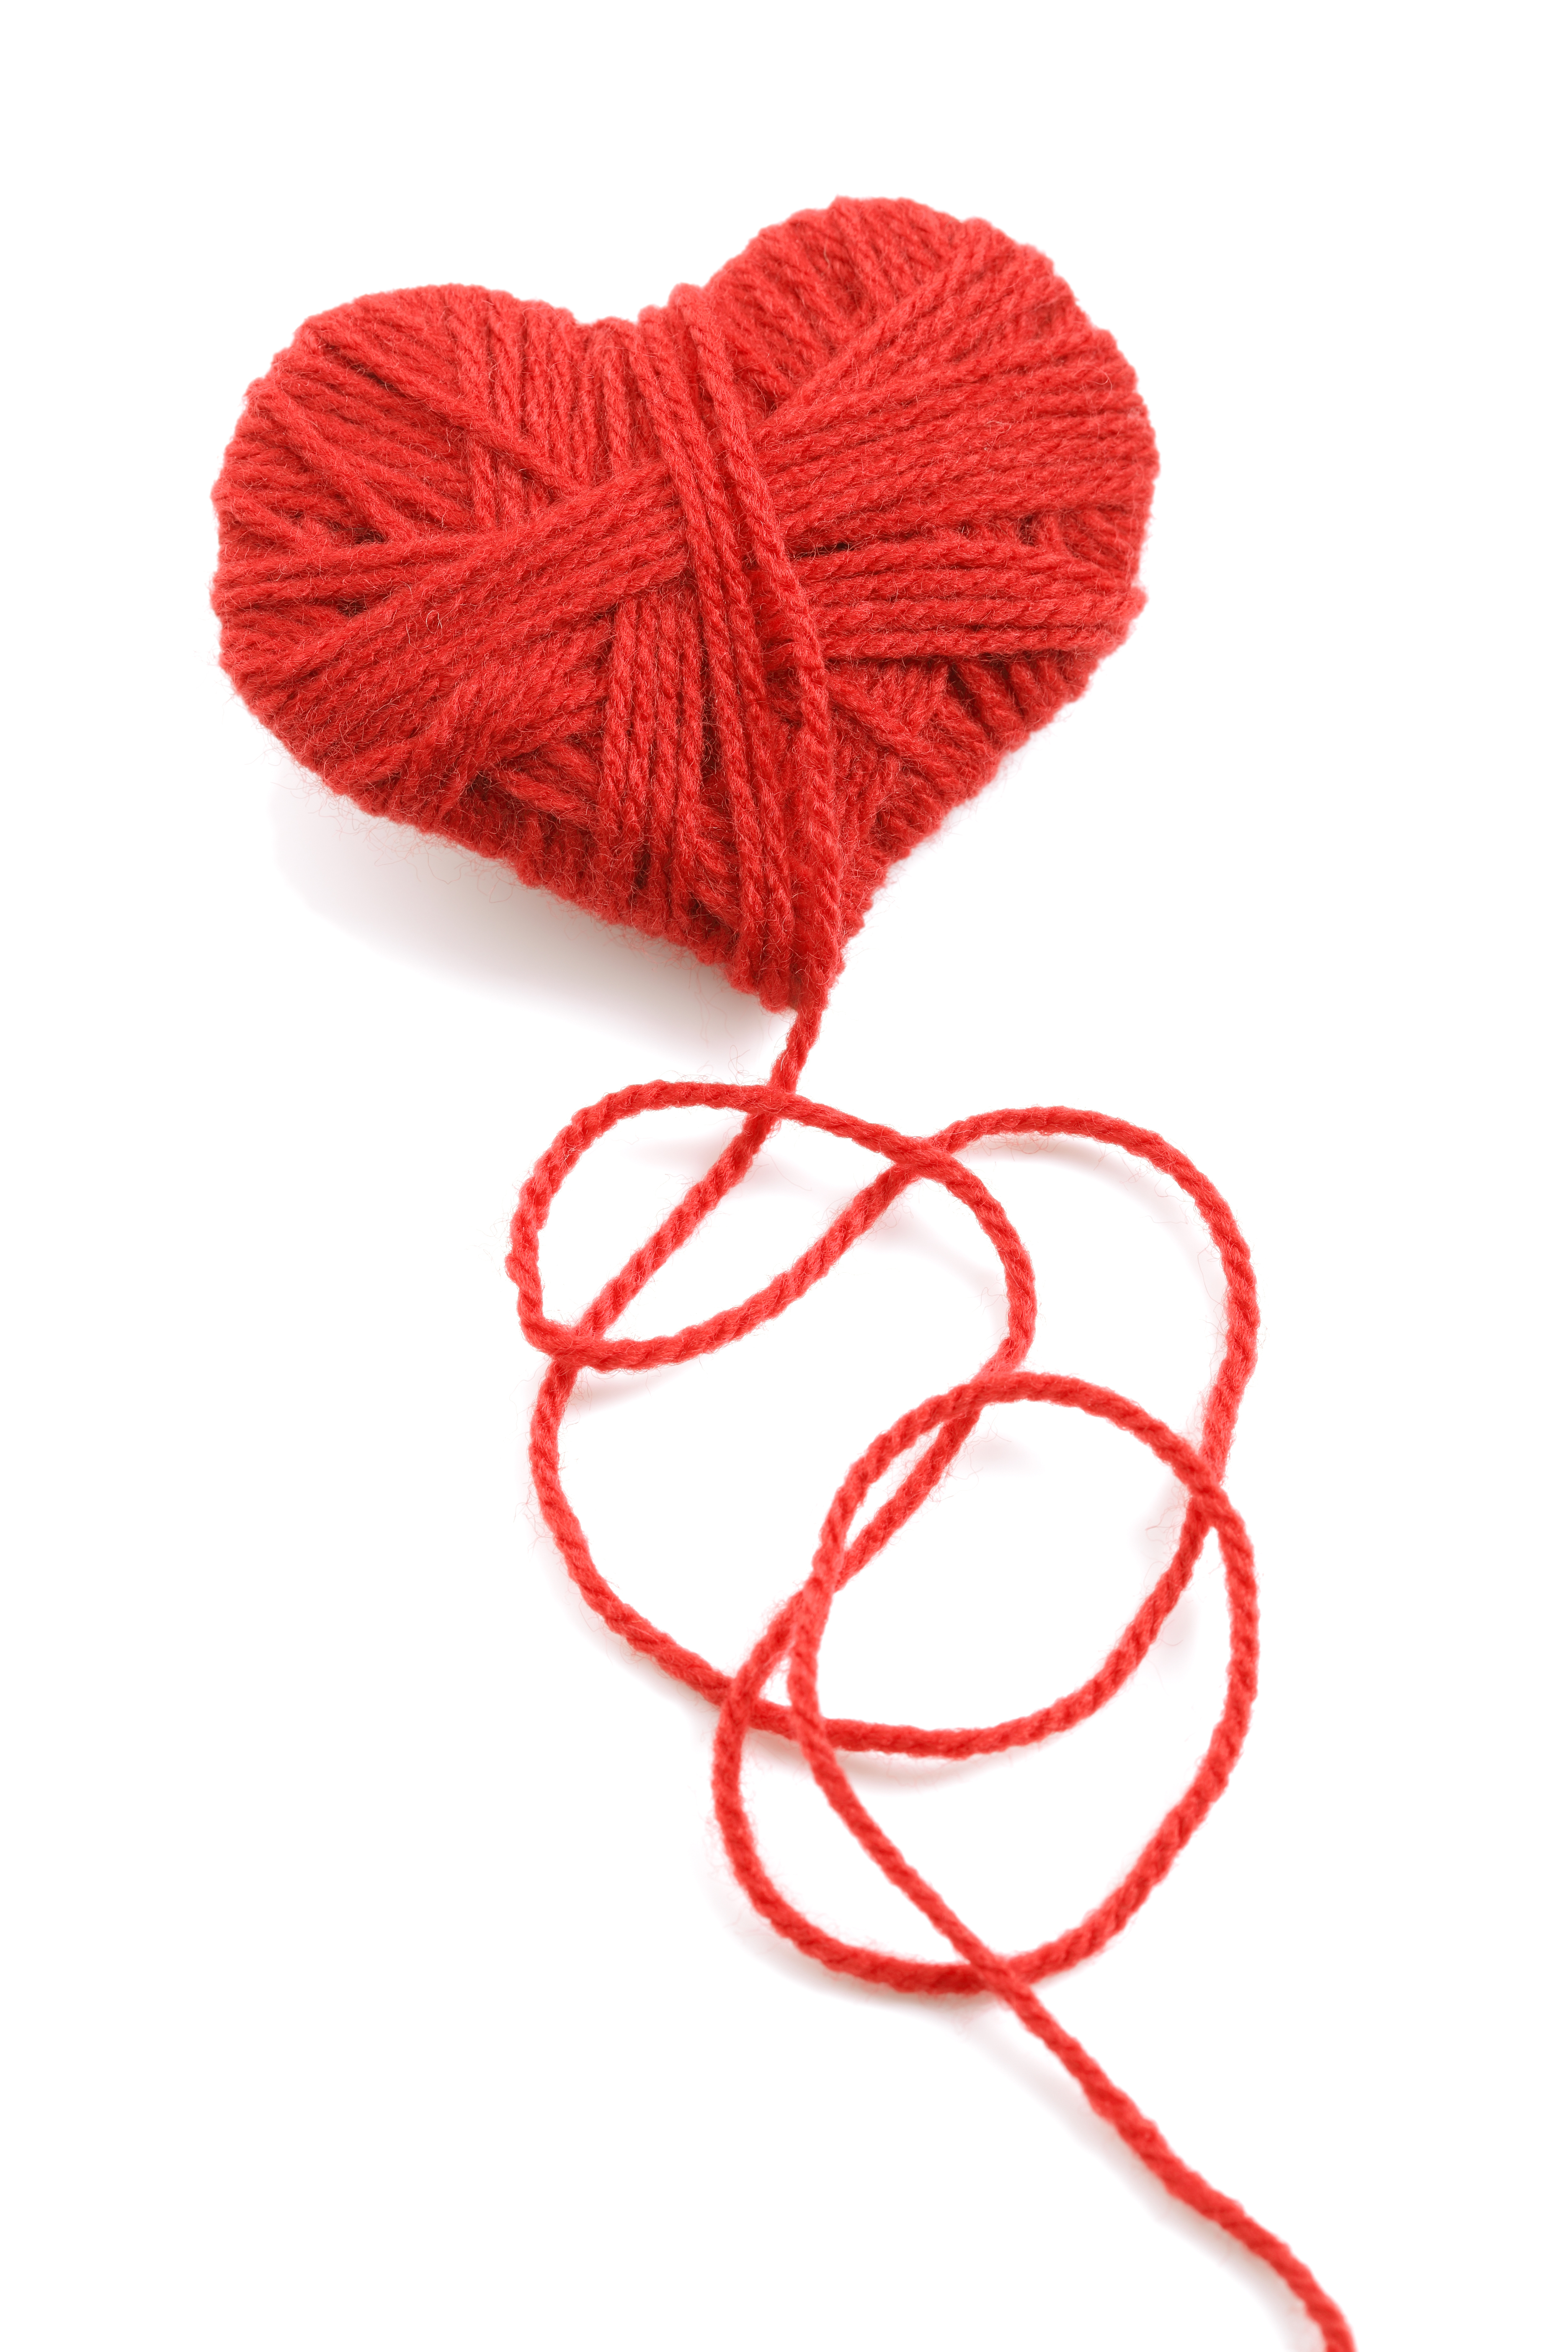 Tell A Story Day – With a Red Thread | Loving Life Blog